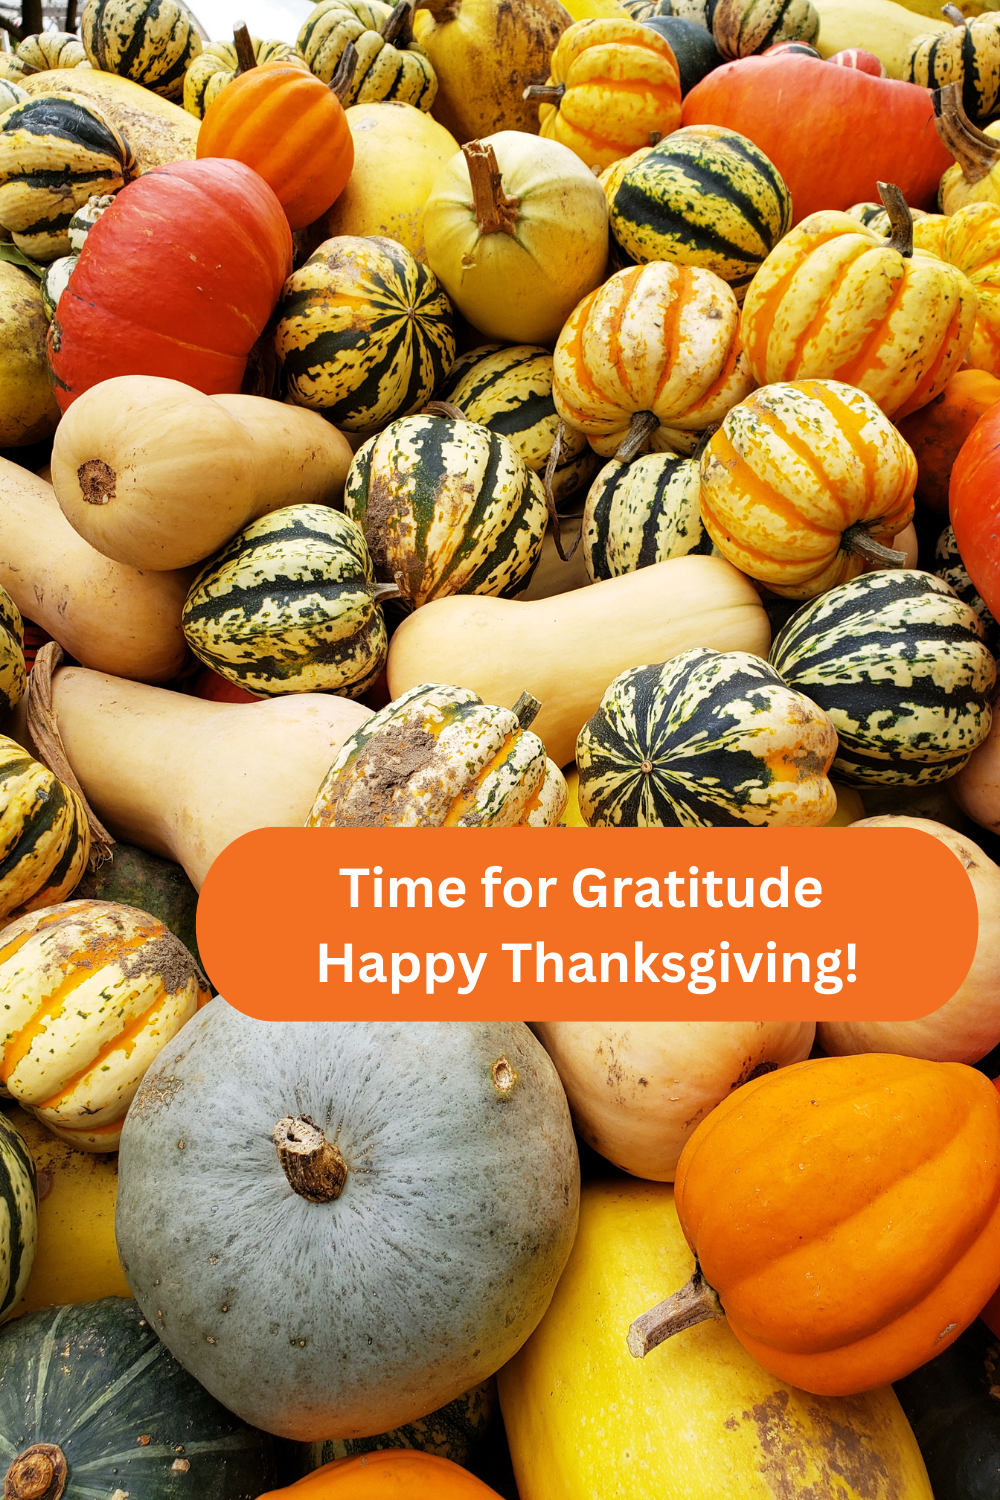 Time for Gratitude - Happy Thanksgiving